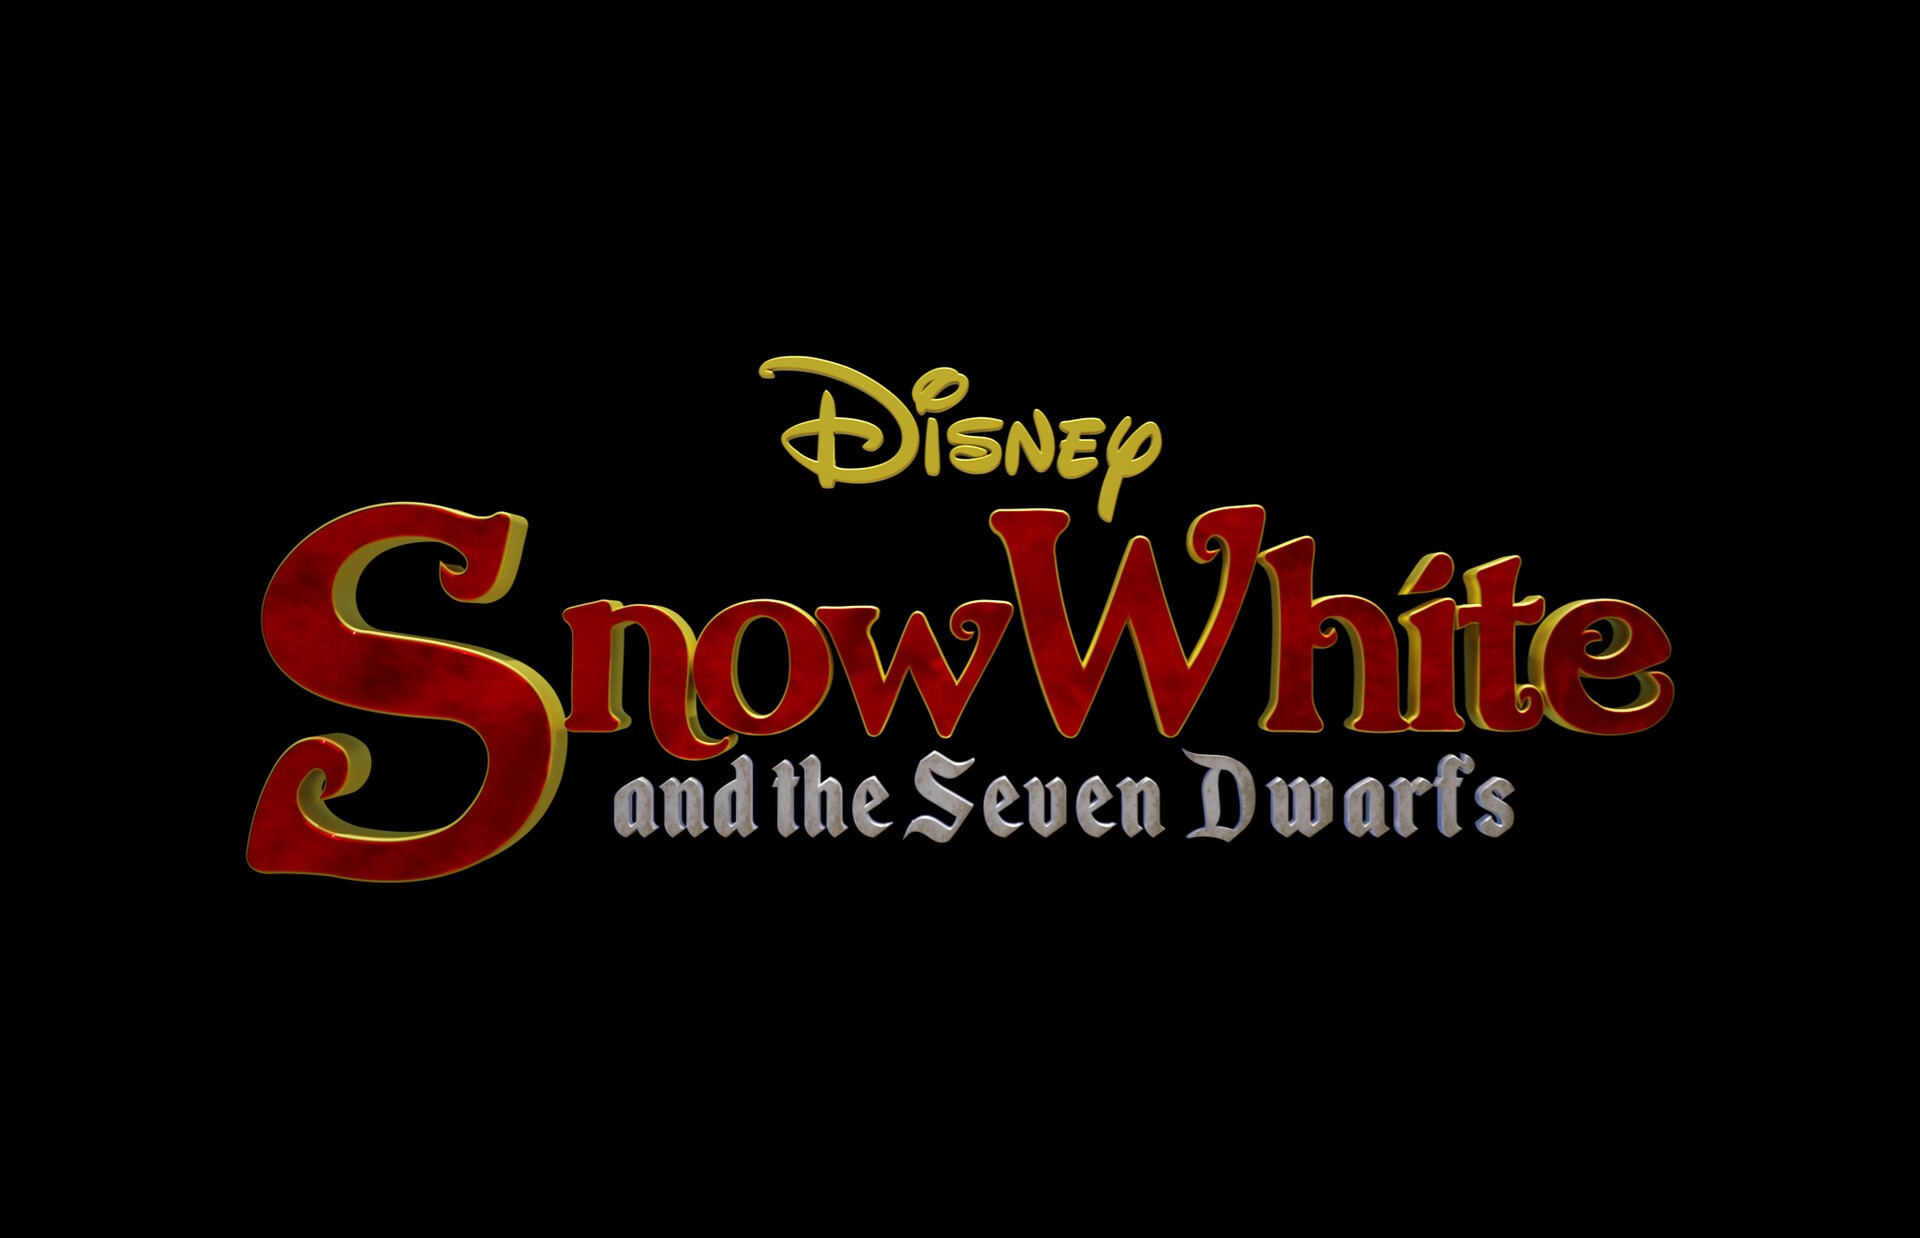 Casting Search Underway for Young Snow White in Upcoming Live-Action Remake